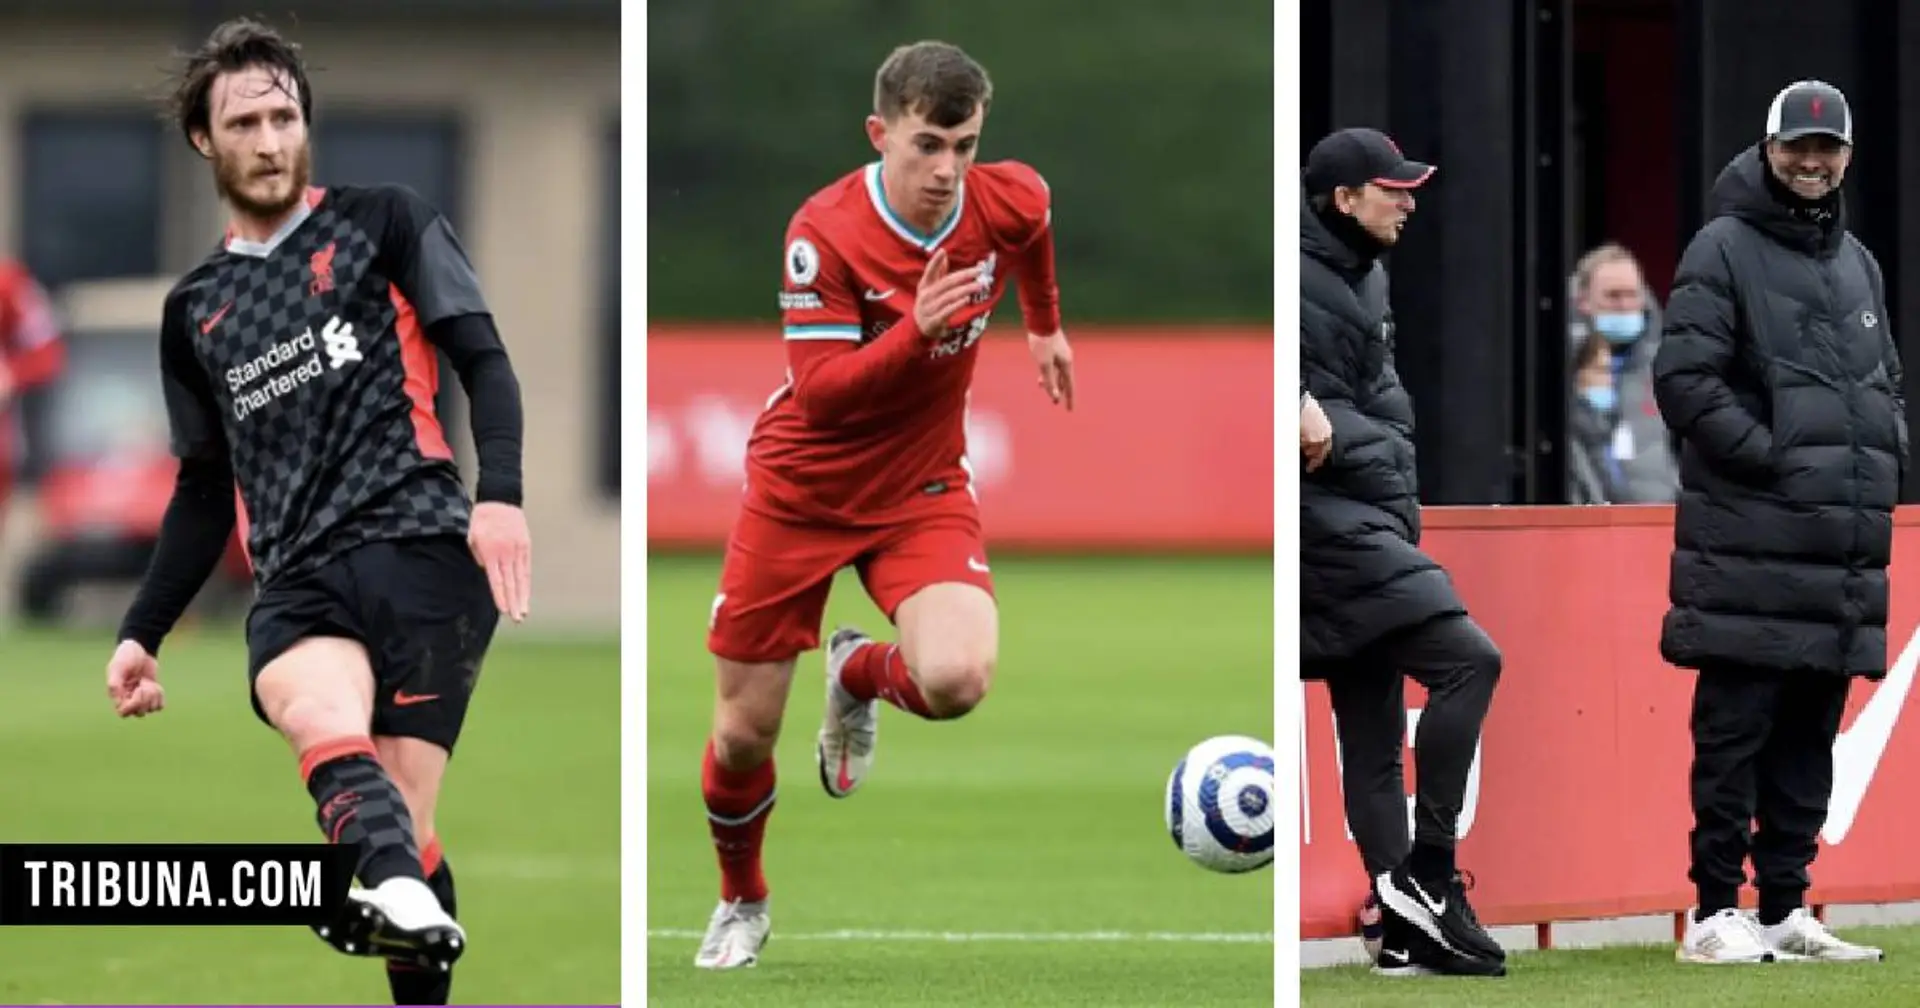 Davies' first appearance in Reds jersey, Woodburn grabs a hat-trick: Everything that happened in the internal match at Kirkby